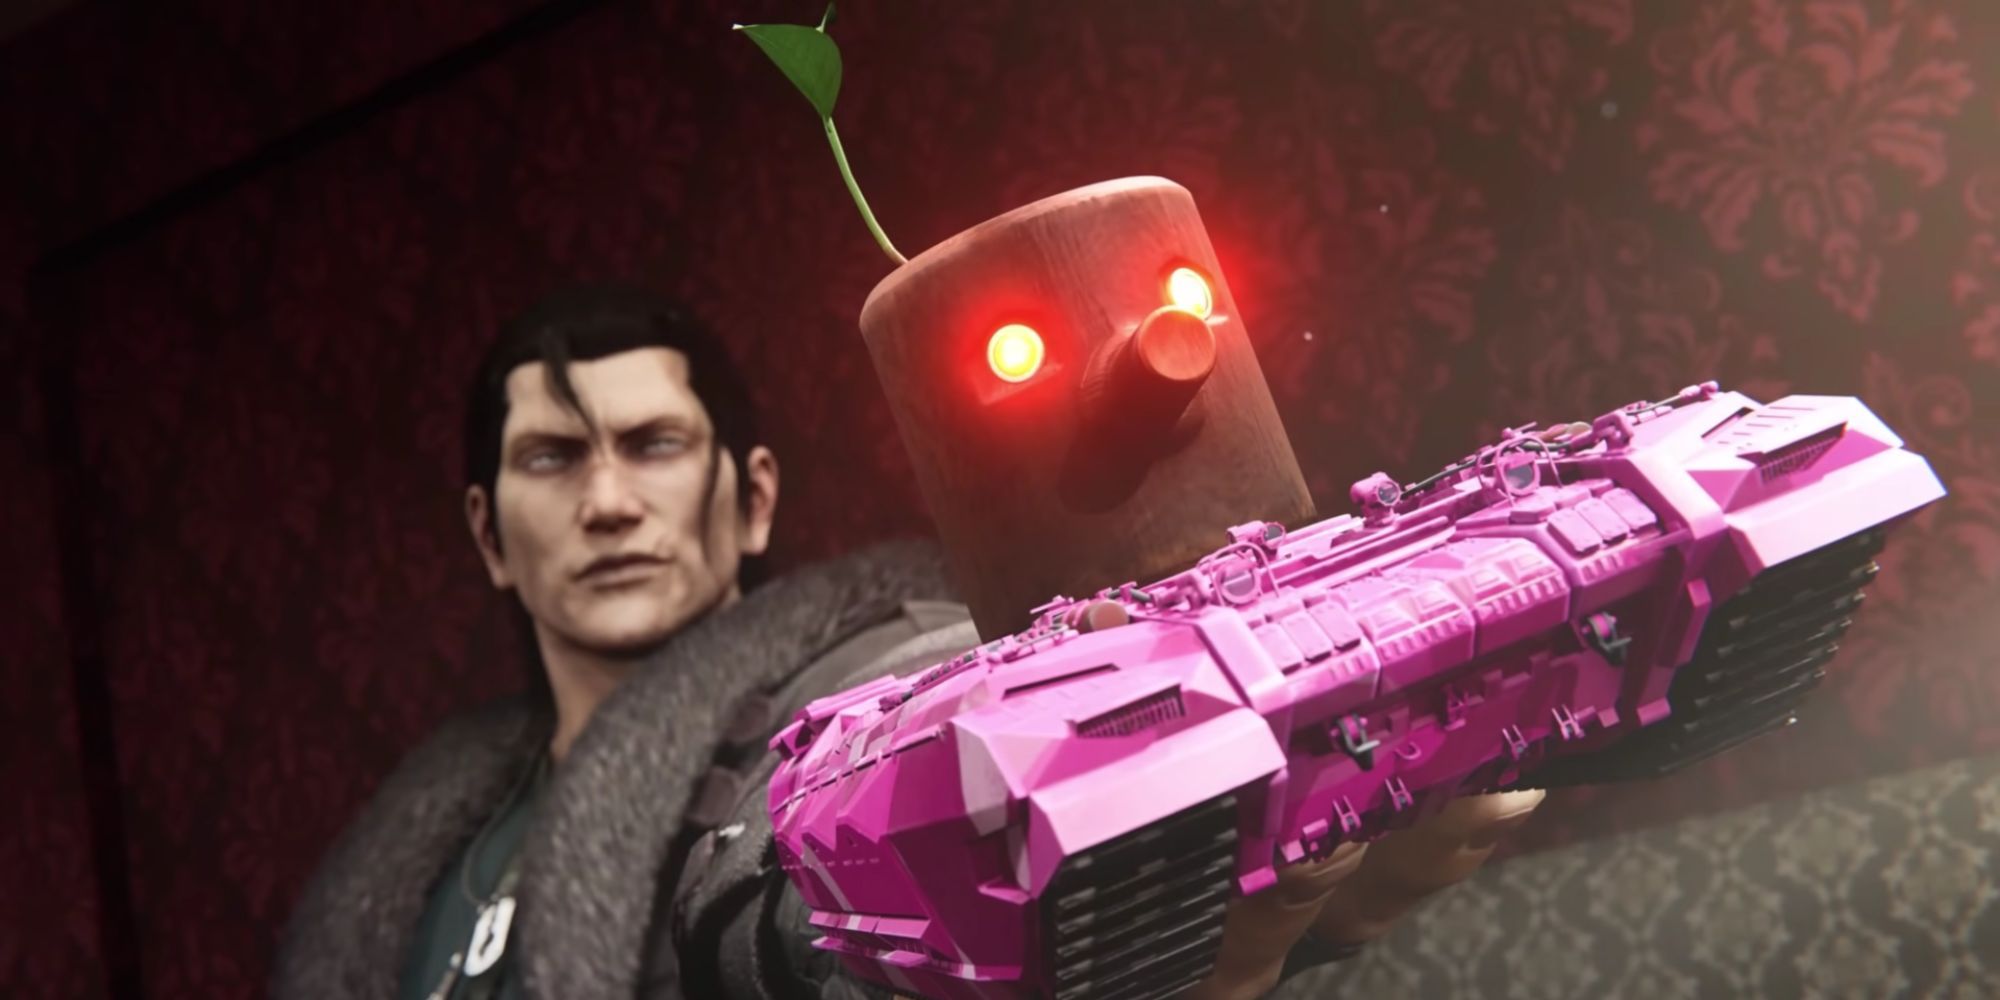 Dragunov holding a tank with a Mokujin head.